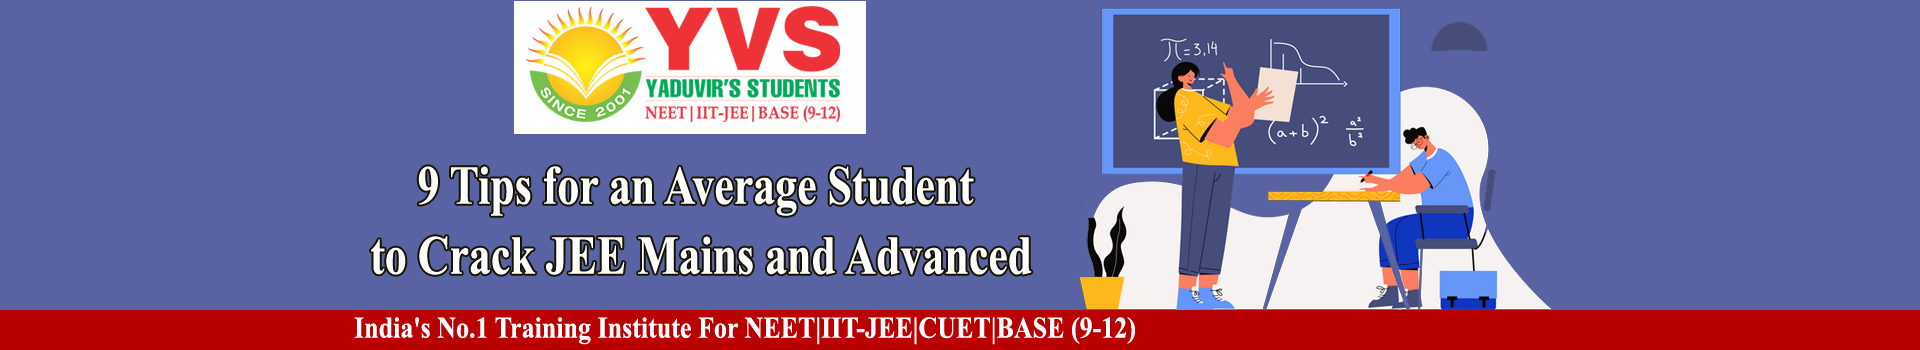 9 Tips for an Average Student to Crack JEE Mains and Advanced